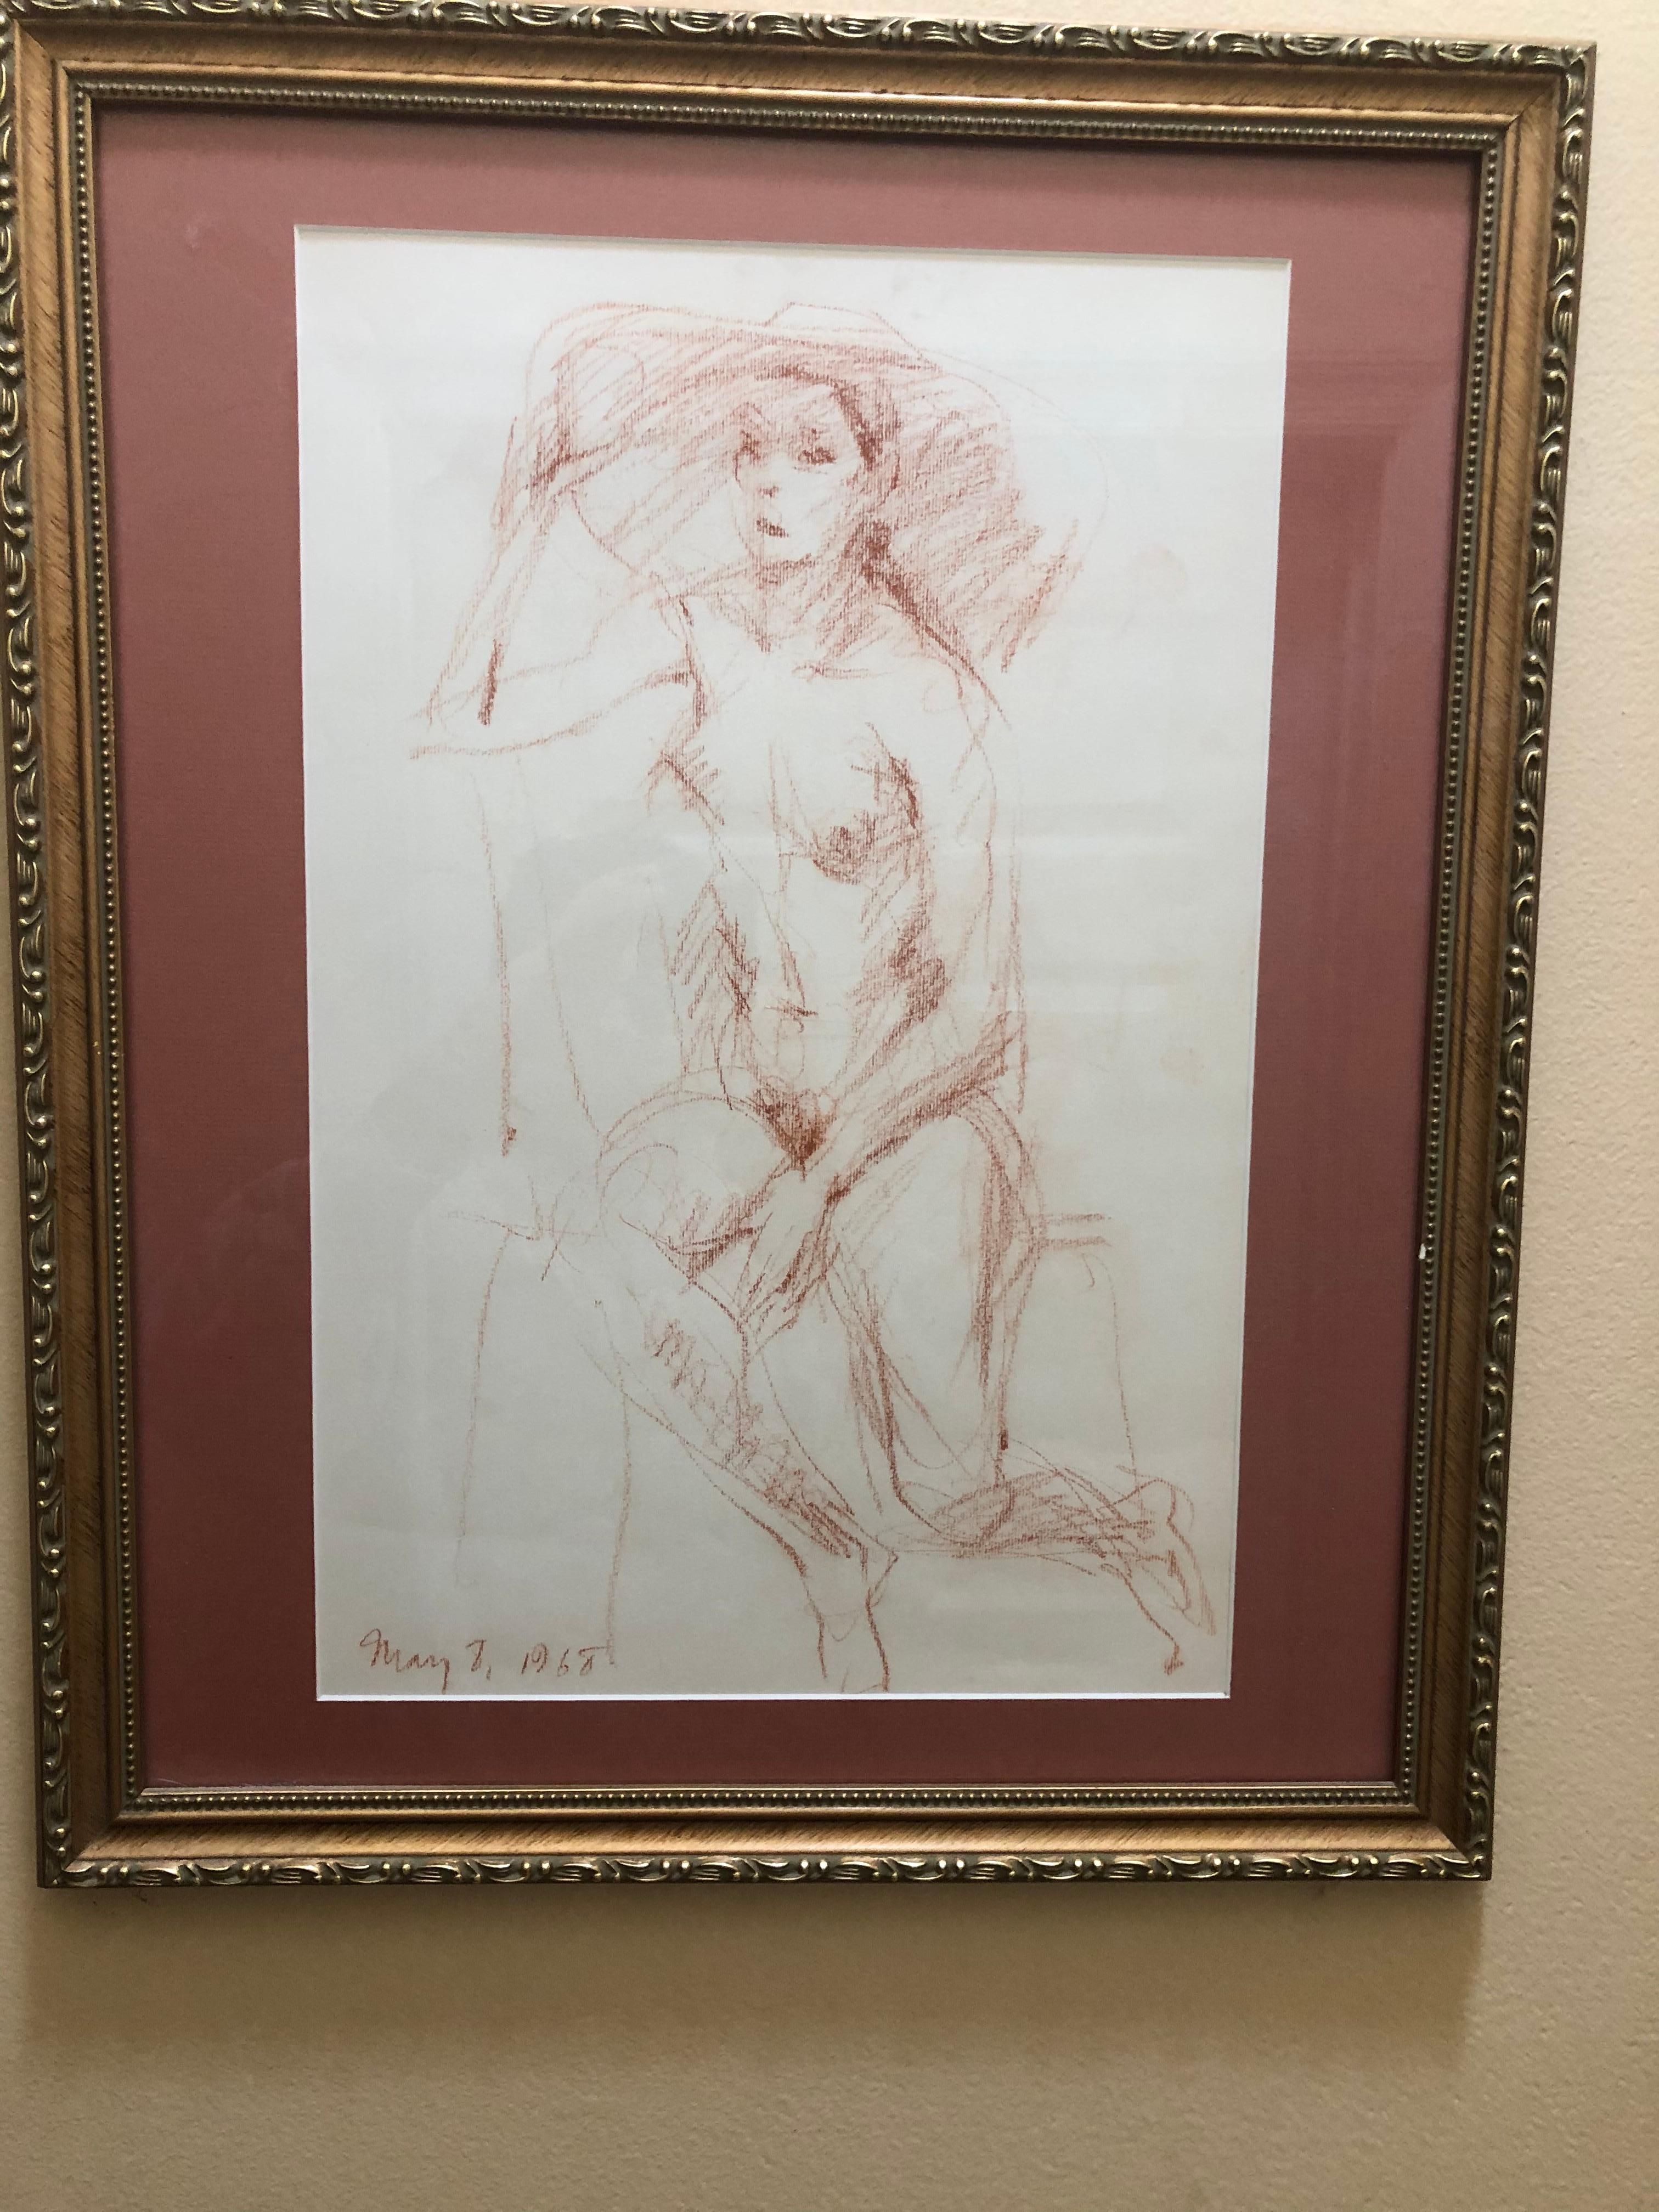  Fabulous mystery 1968 sepia drawing of a nude woman. This drawing is finely executed by an obviously talented artist. It is dated but no apparent signature. Drawing measures approximately 17 1/4 inches high by 11 1/4 wide. The frame measures 22 1/4